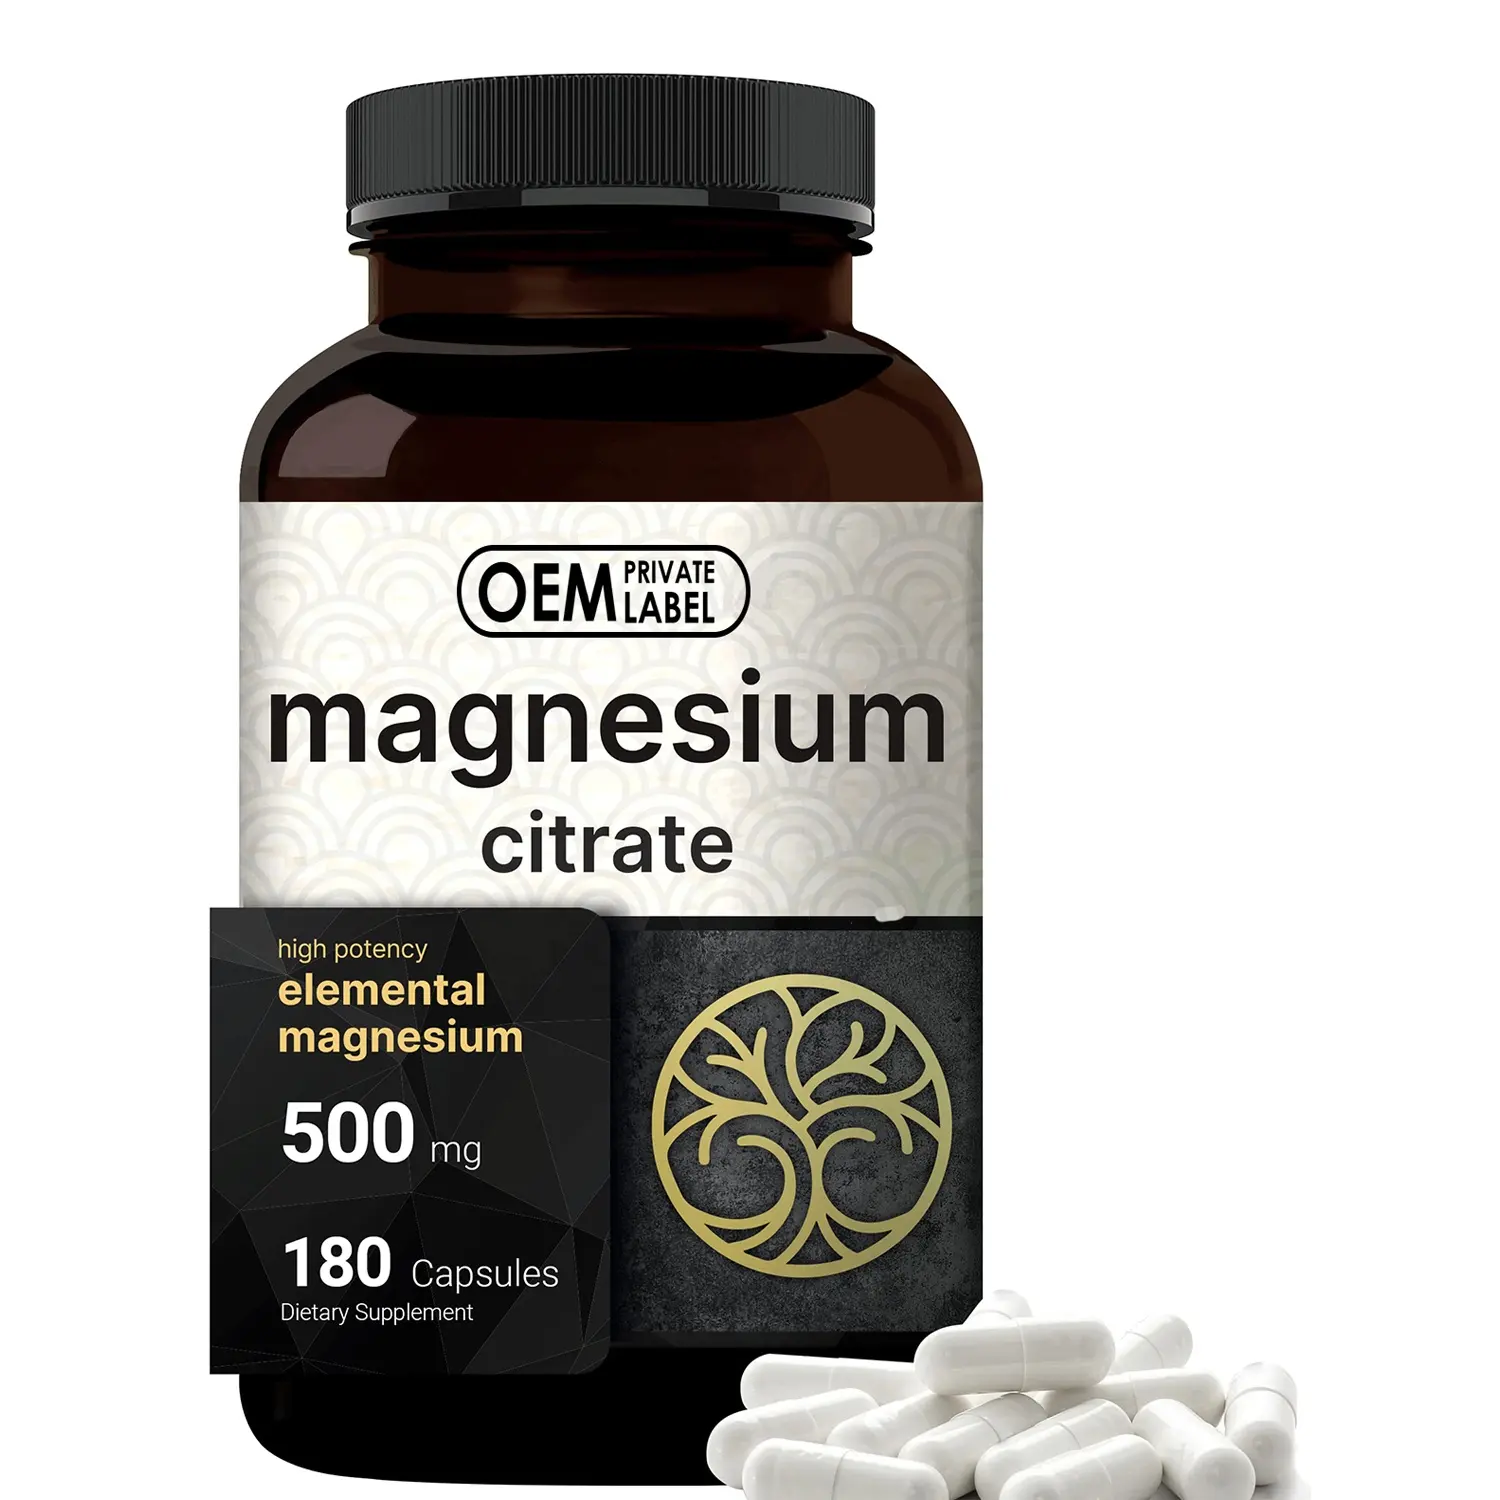 Magnesium Citrate 500mg Capsules Magnesium Extra Strong Healthy Heart Muscles Sleep Supplement Magnesium Glycinate Capsule Pills